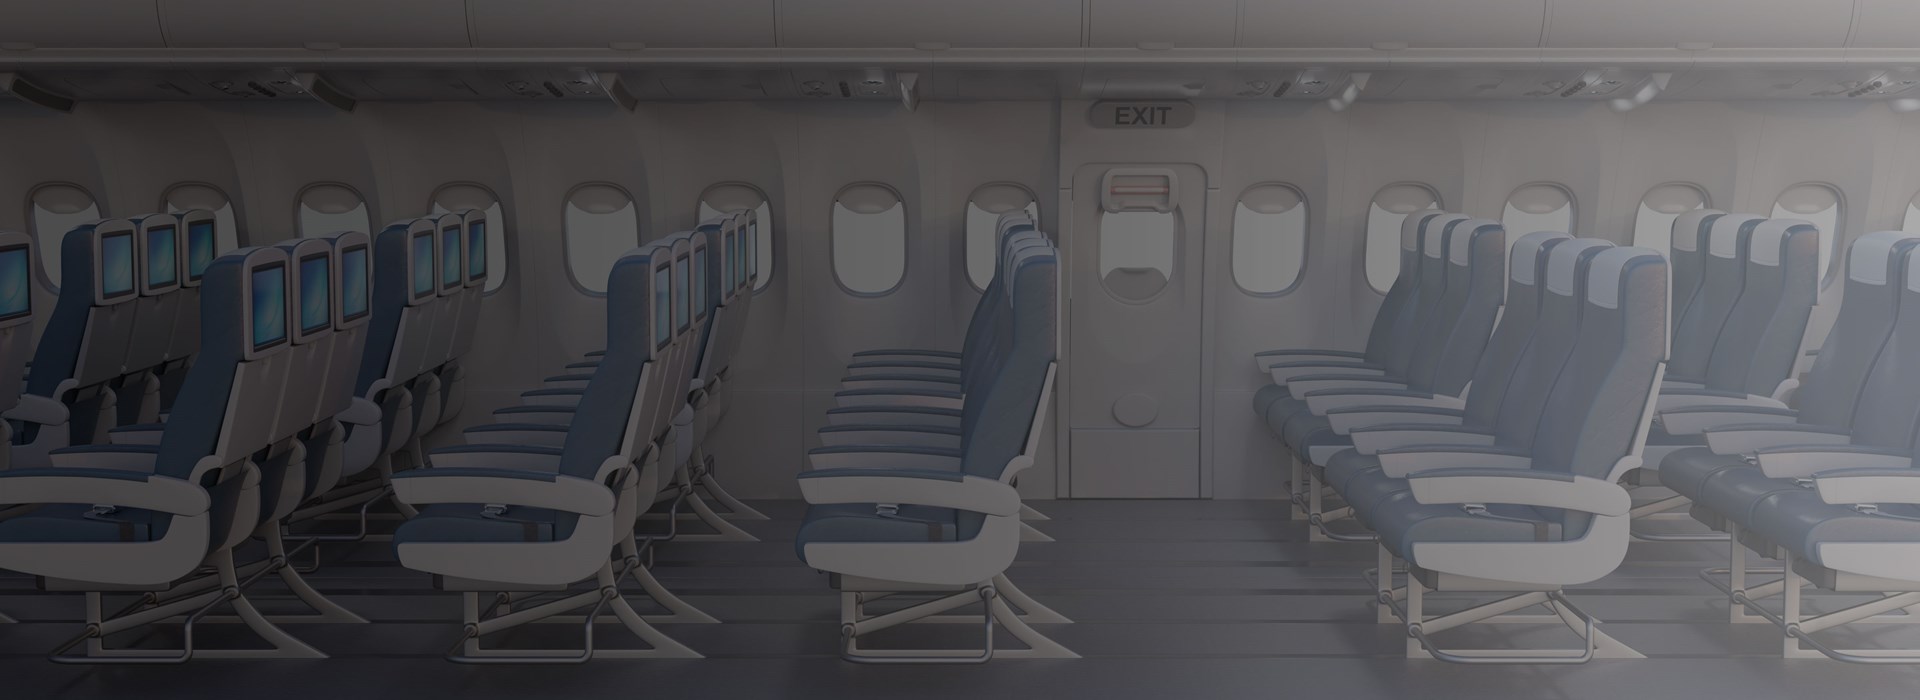 Stratasys Direct commercial airline side view of seats